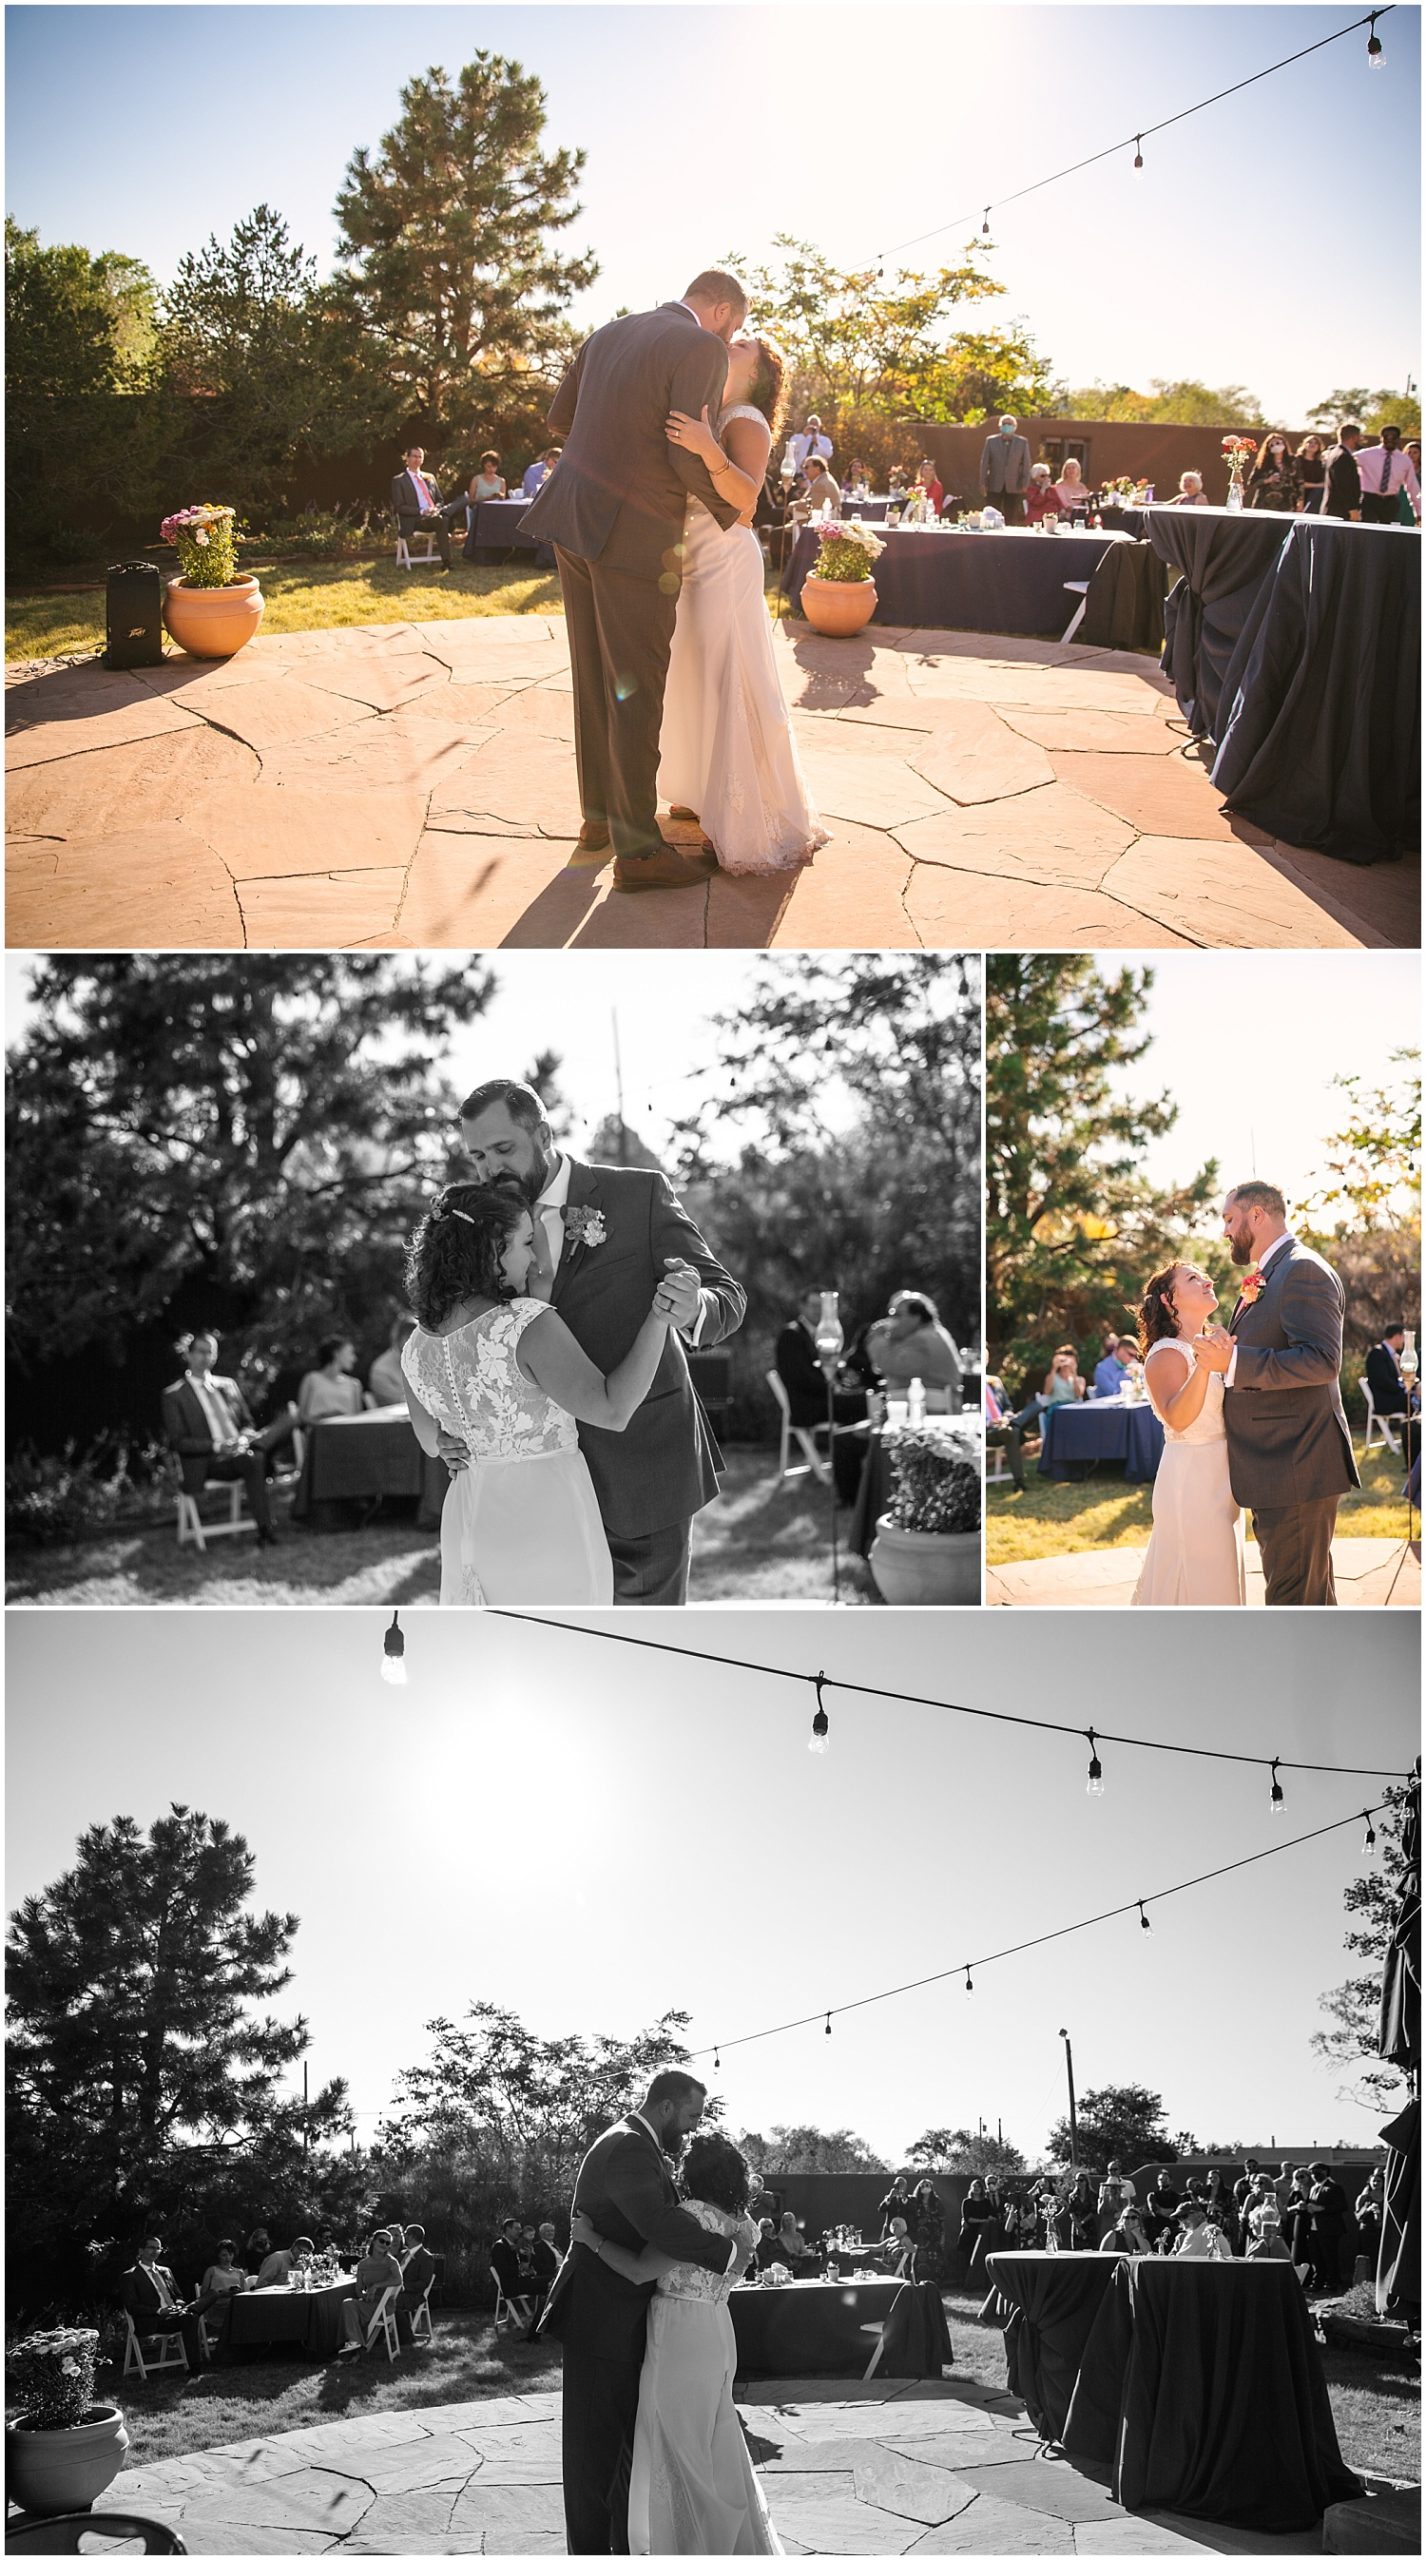 Bride and groom's first dance on the patio at backyard wedding